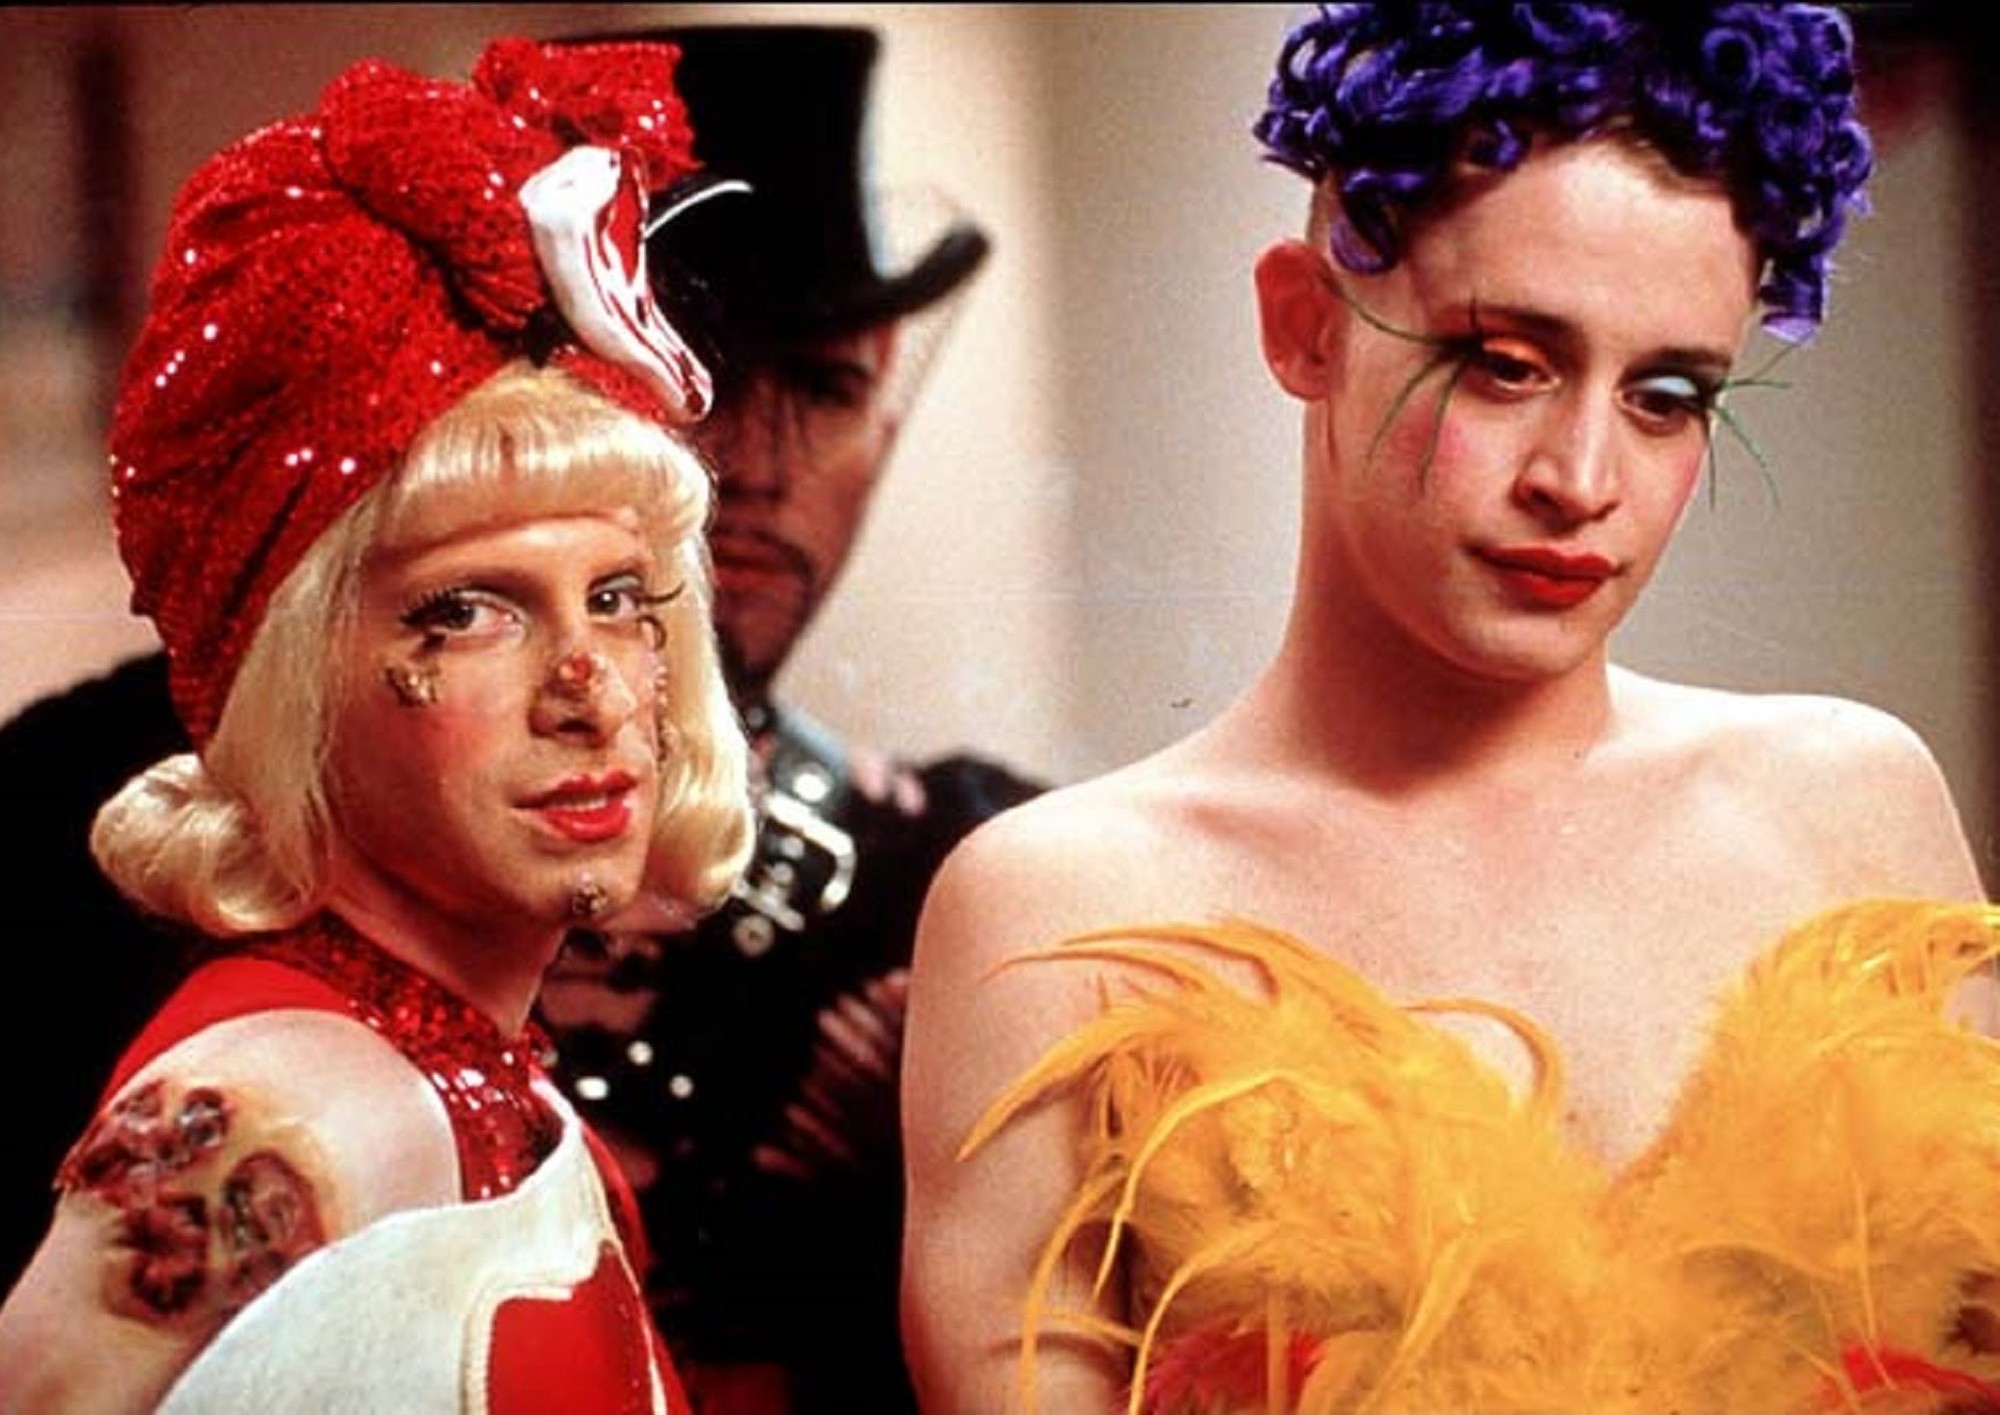 Scene from the motion picture, Party Monster